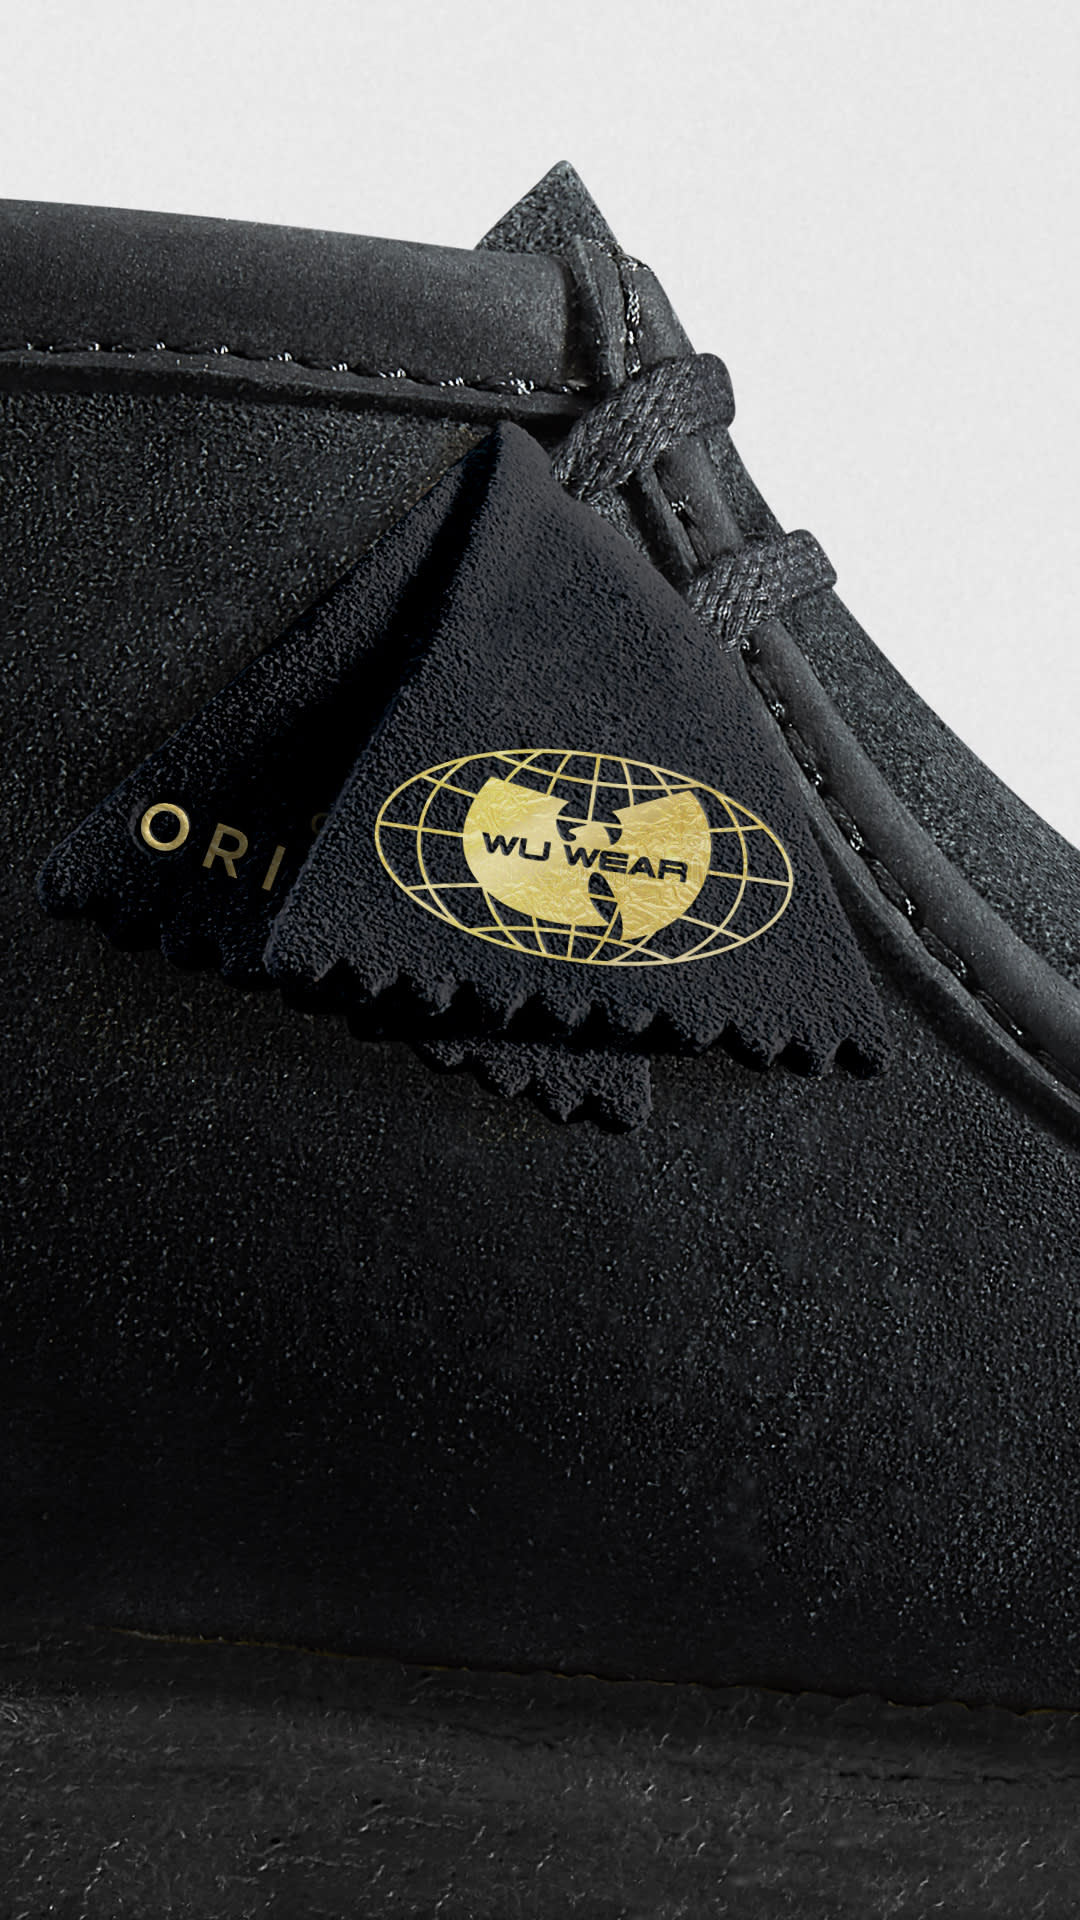 Wu-Tang Get Their Own Clarks Wallabee Boots - Sneaker Freaker